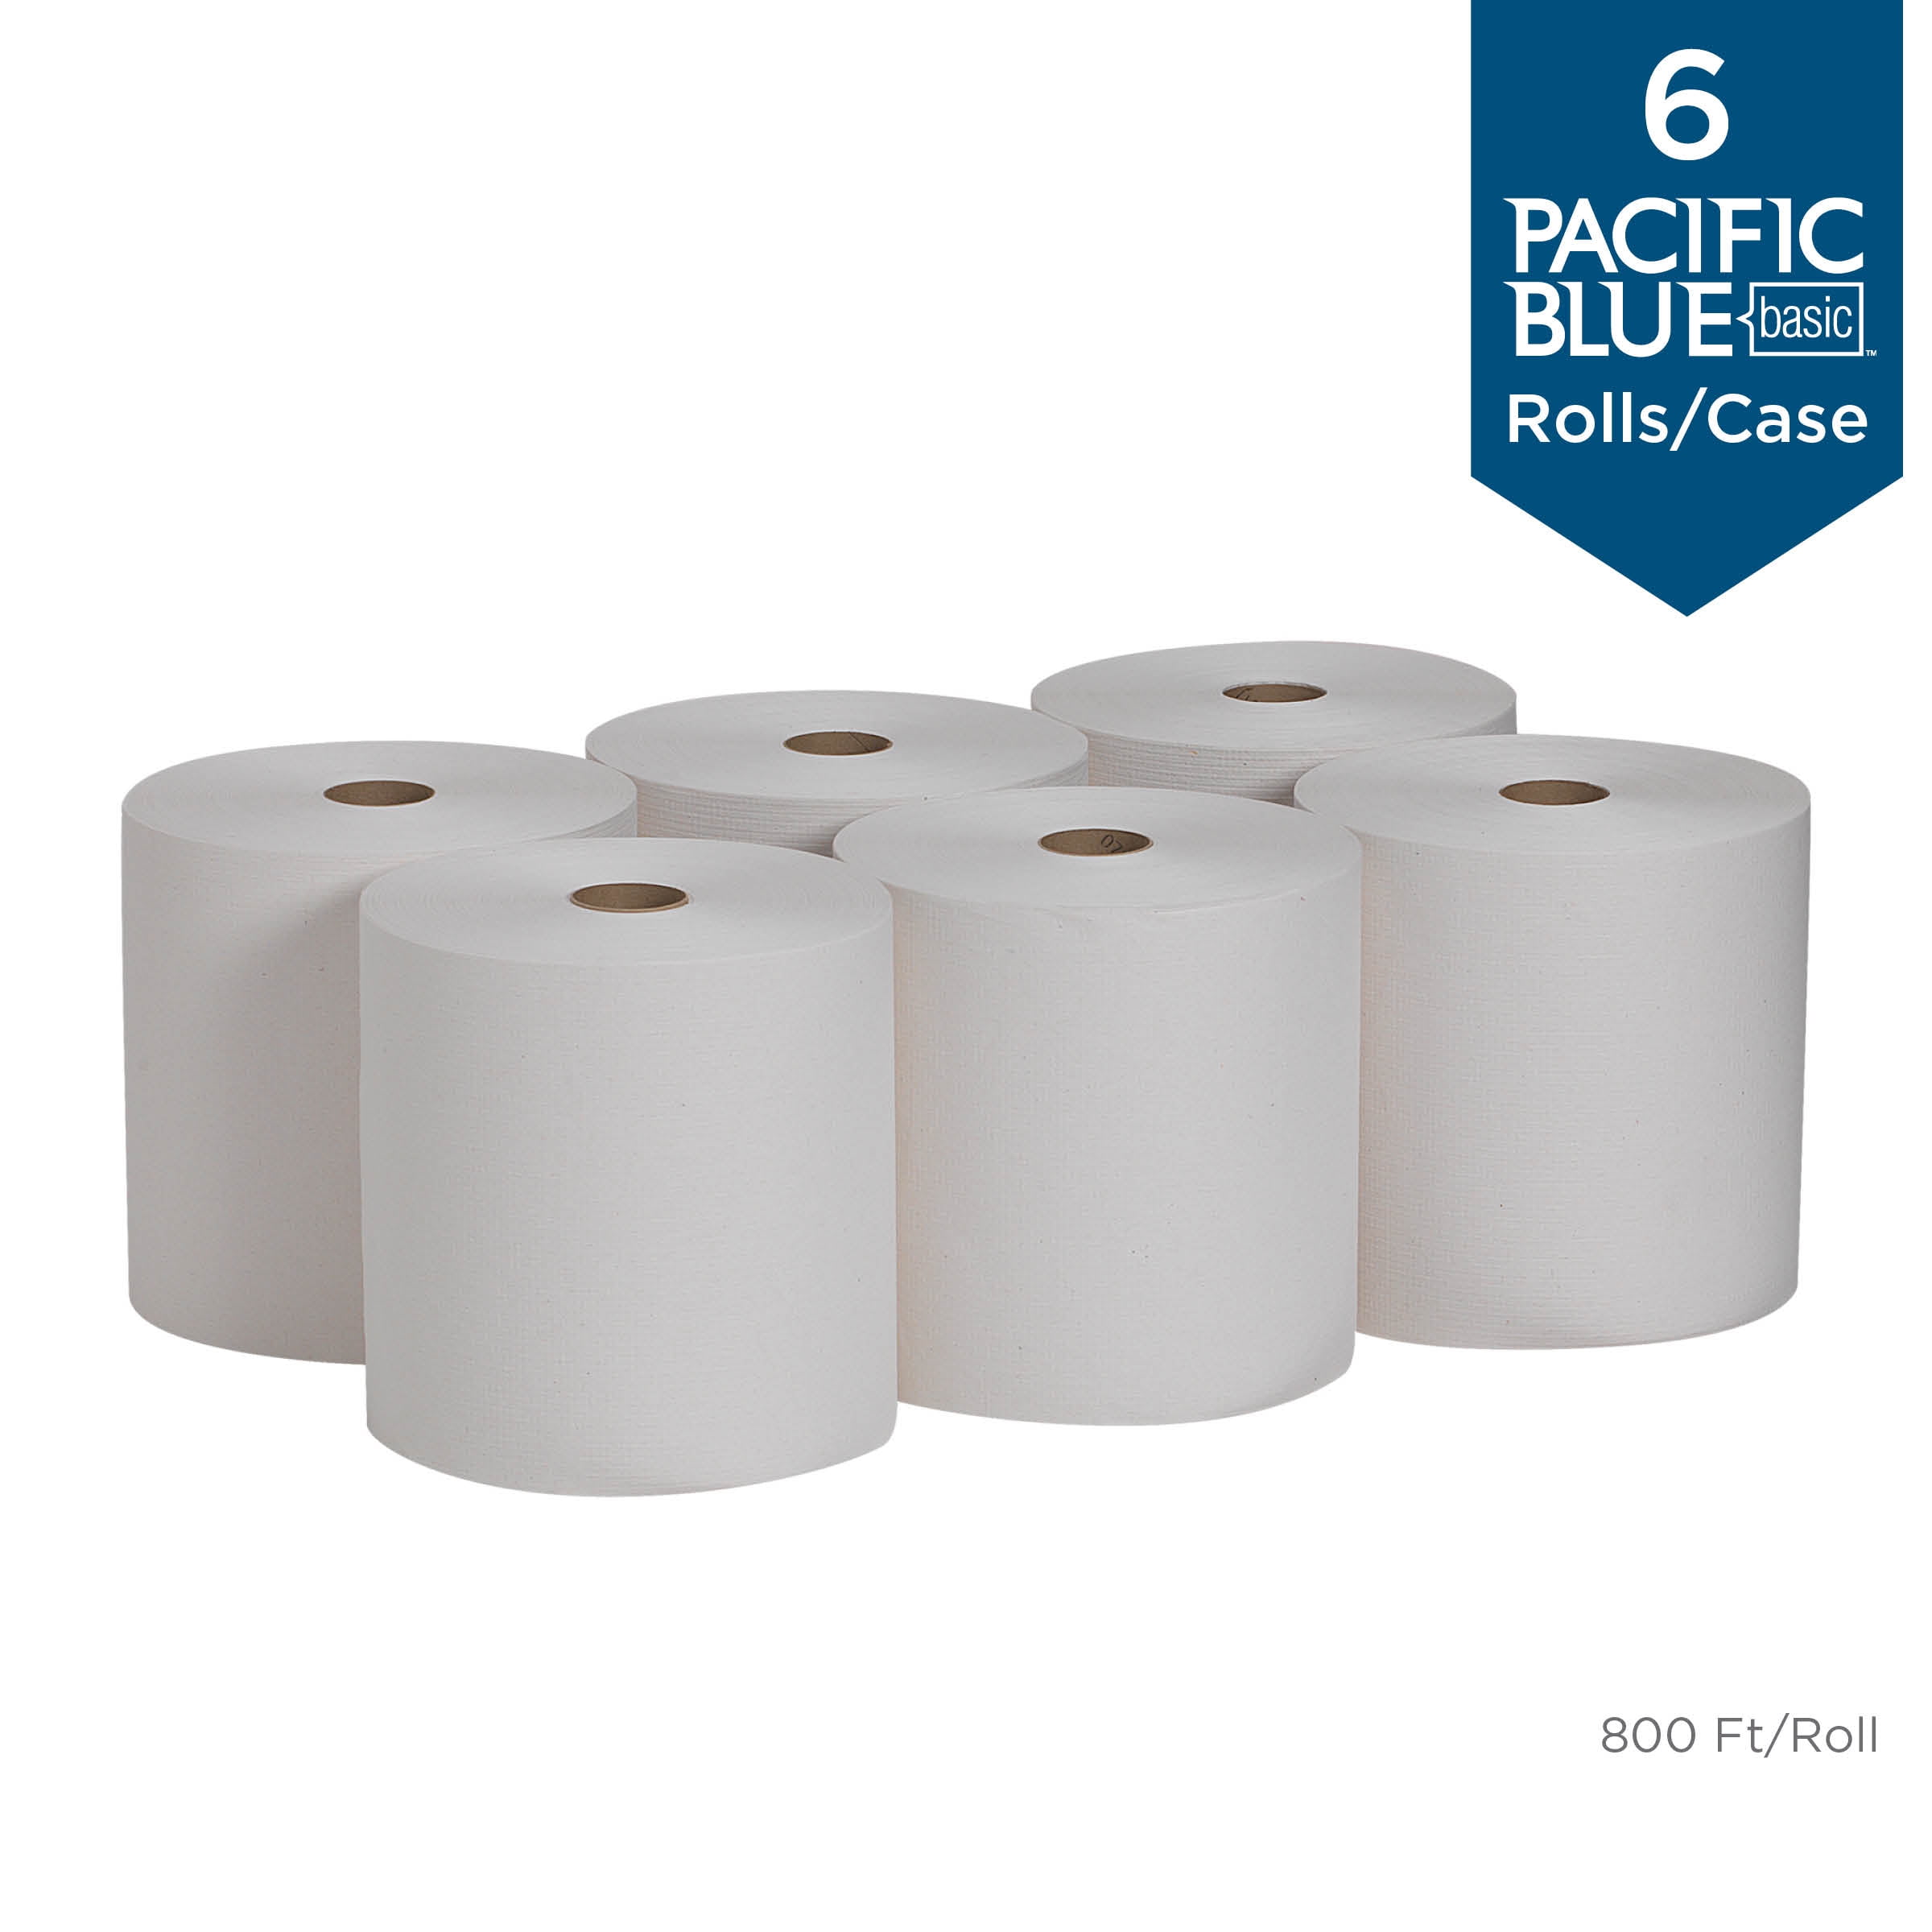 Details about   KIMBERLY-CLARK PROFESSIONAL 02000 Paper Towel Roll,950 ft.,White,PK6 